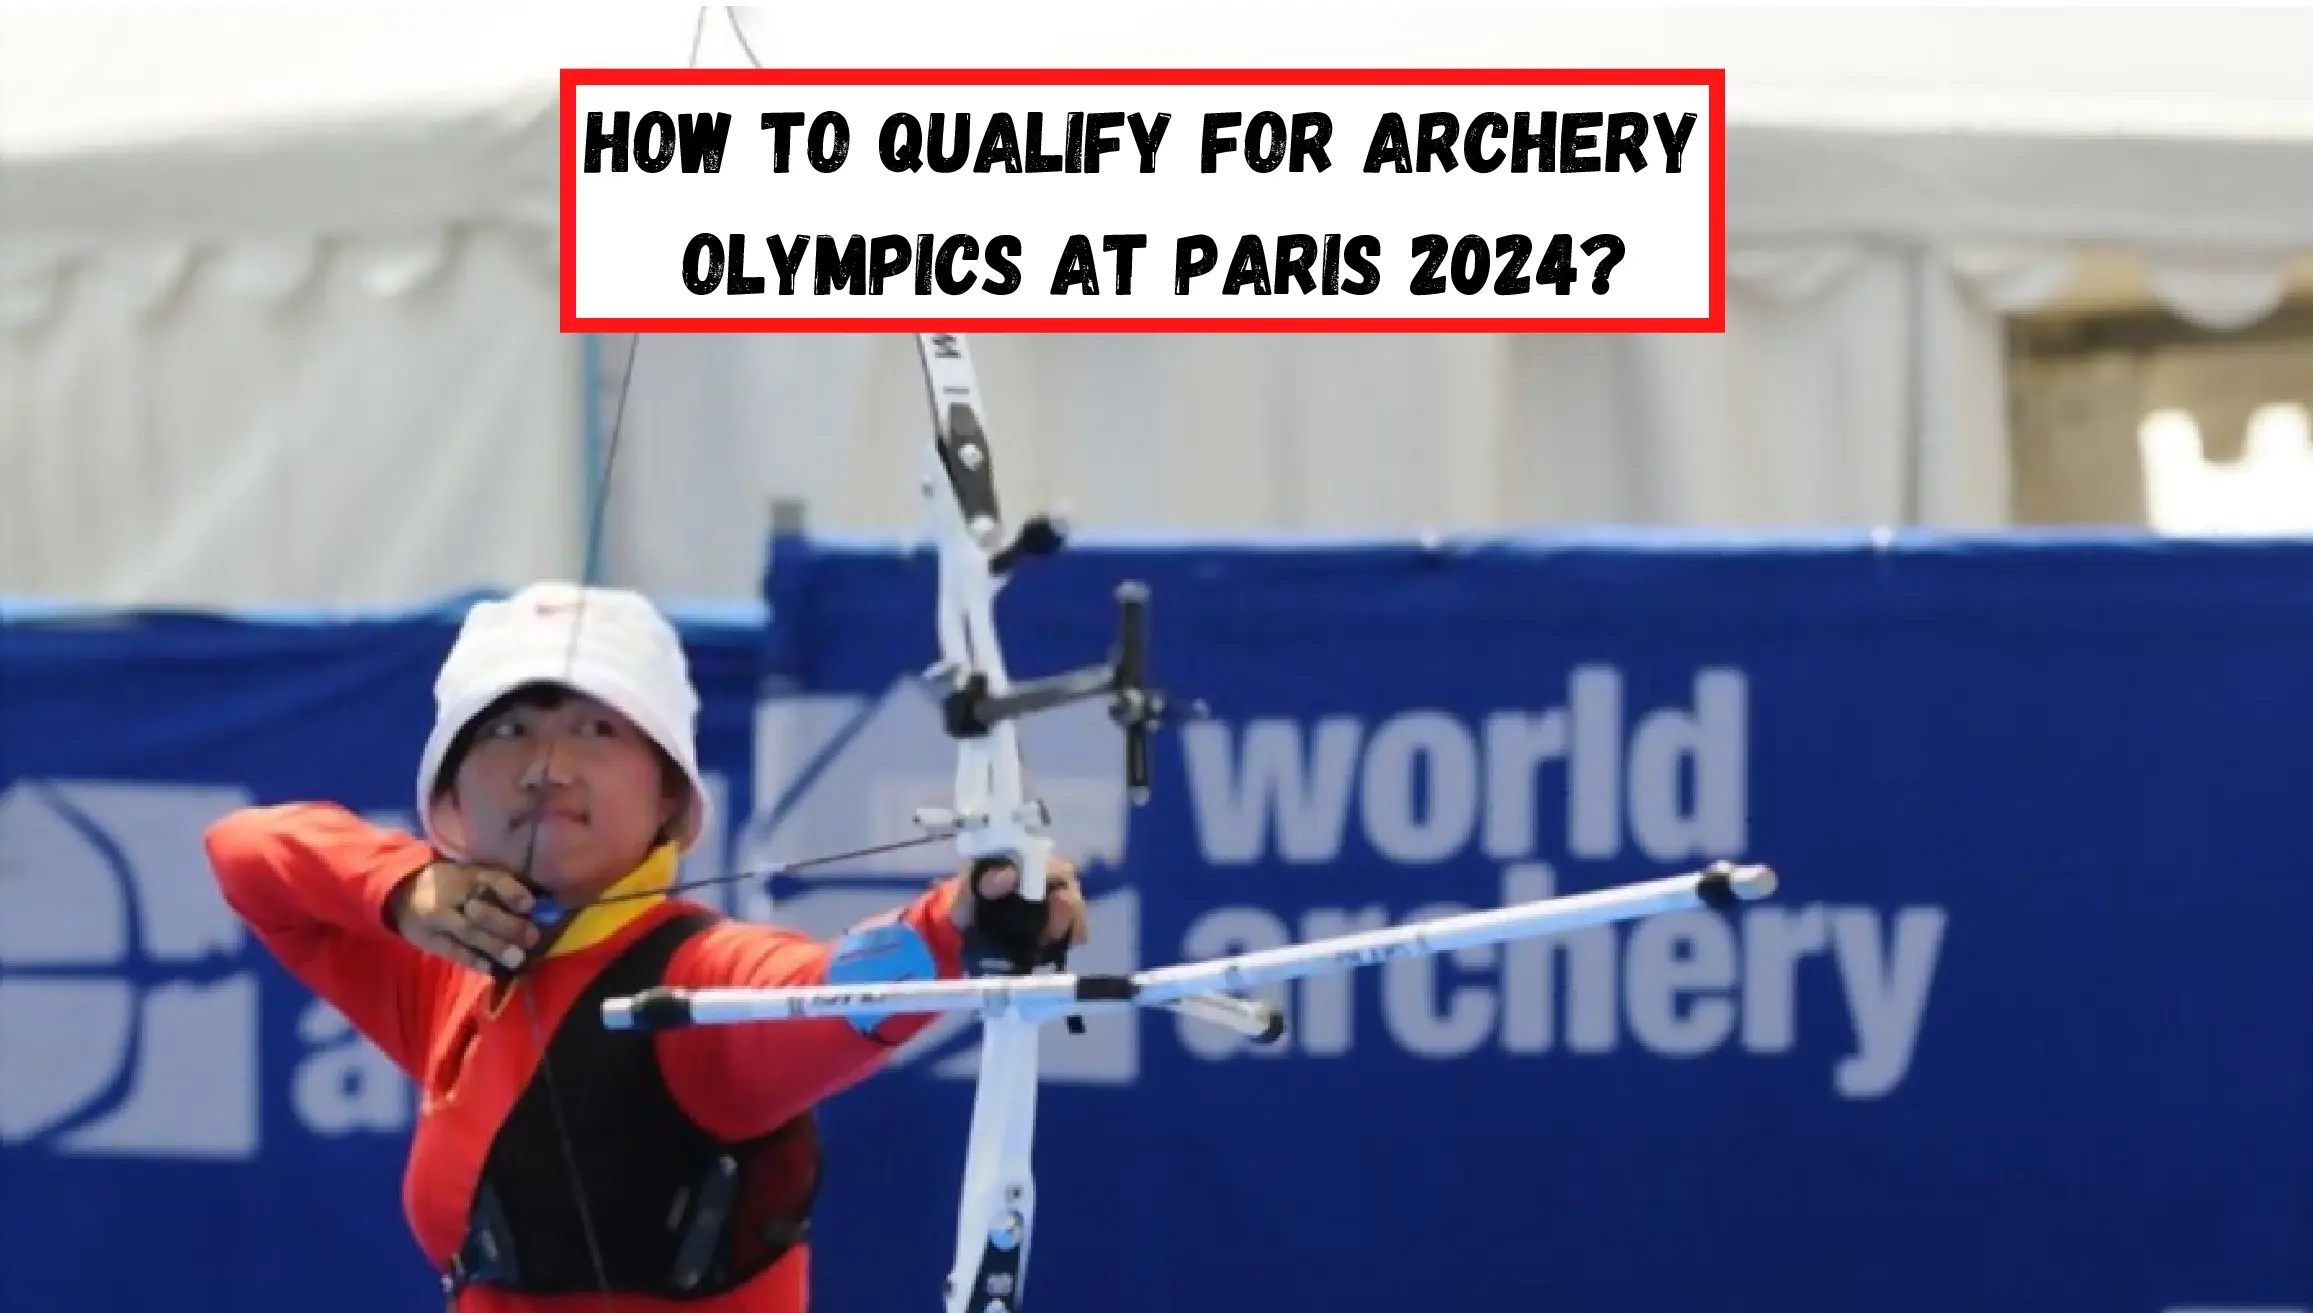 How To Qualify For Archery Olympics At Paris 2024? (Guide)